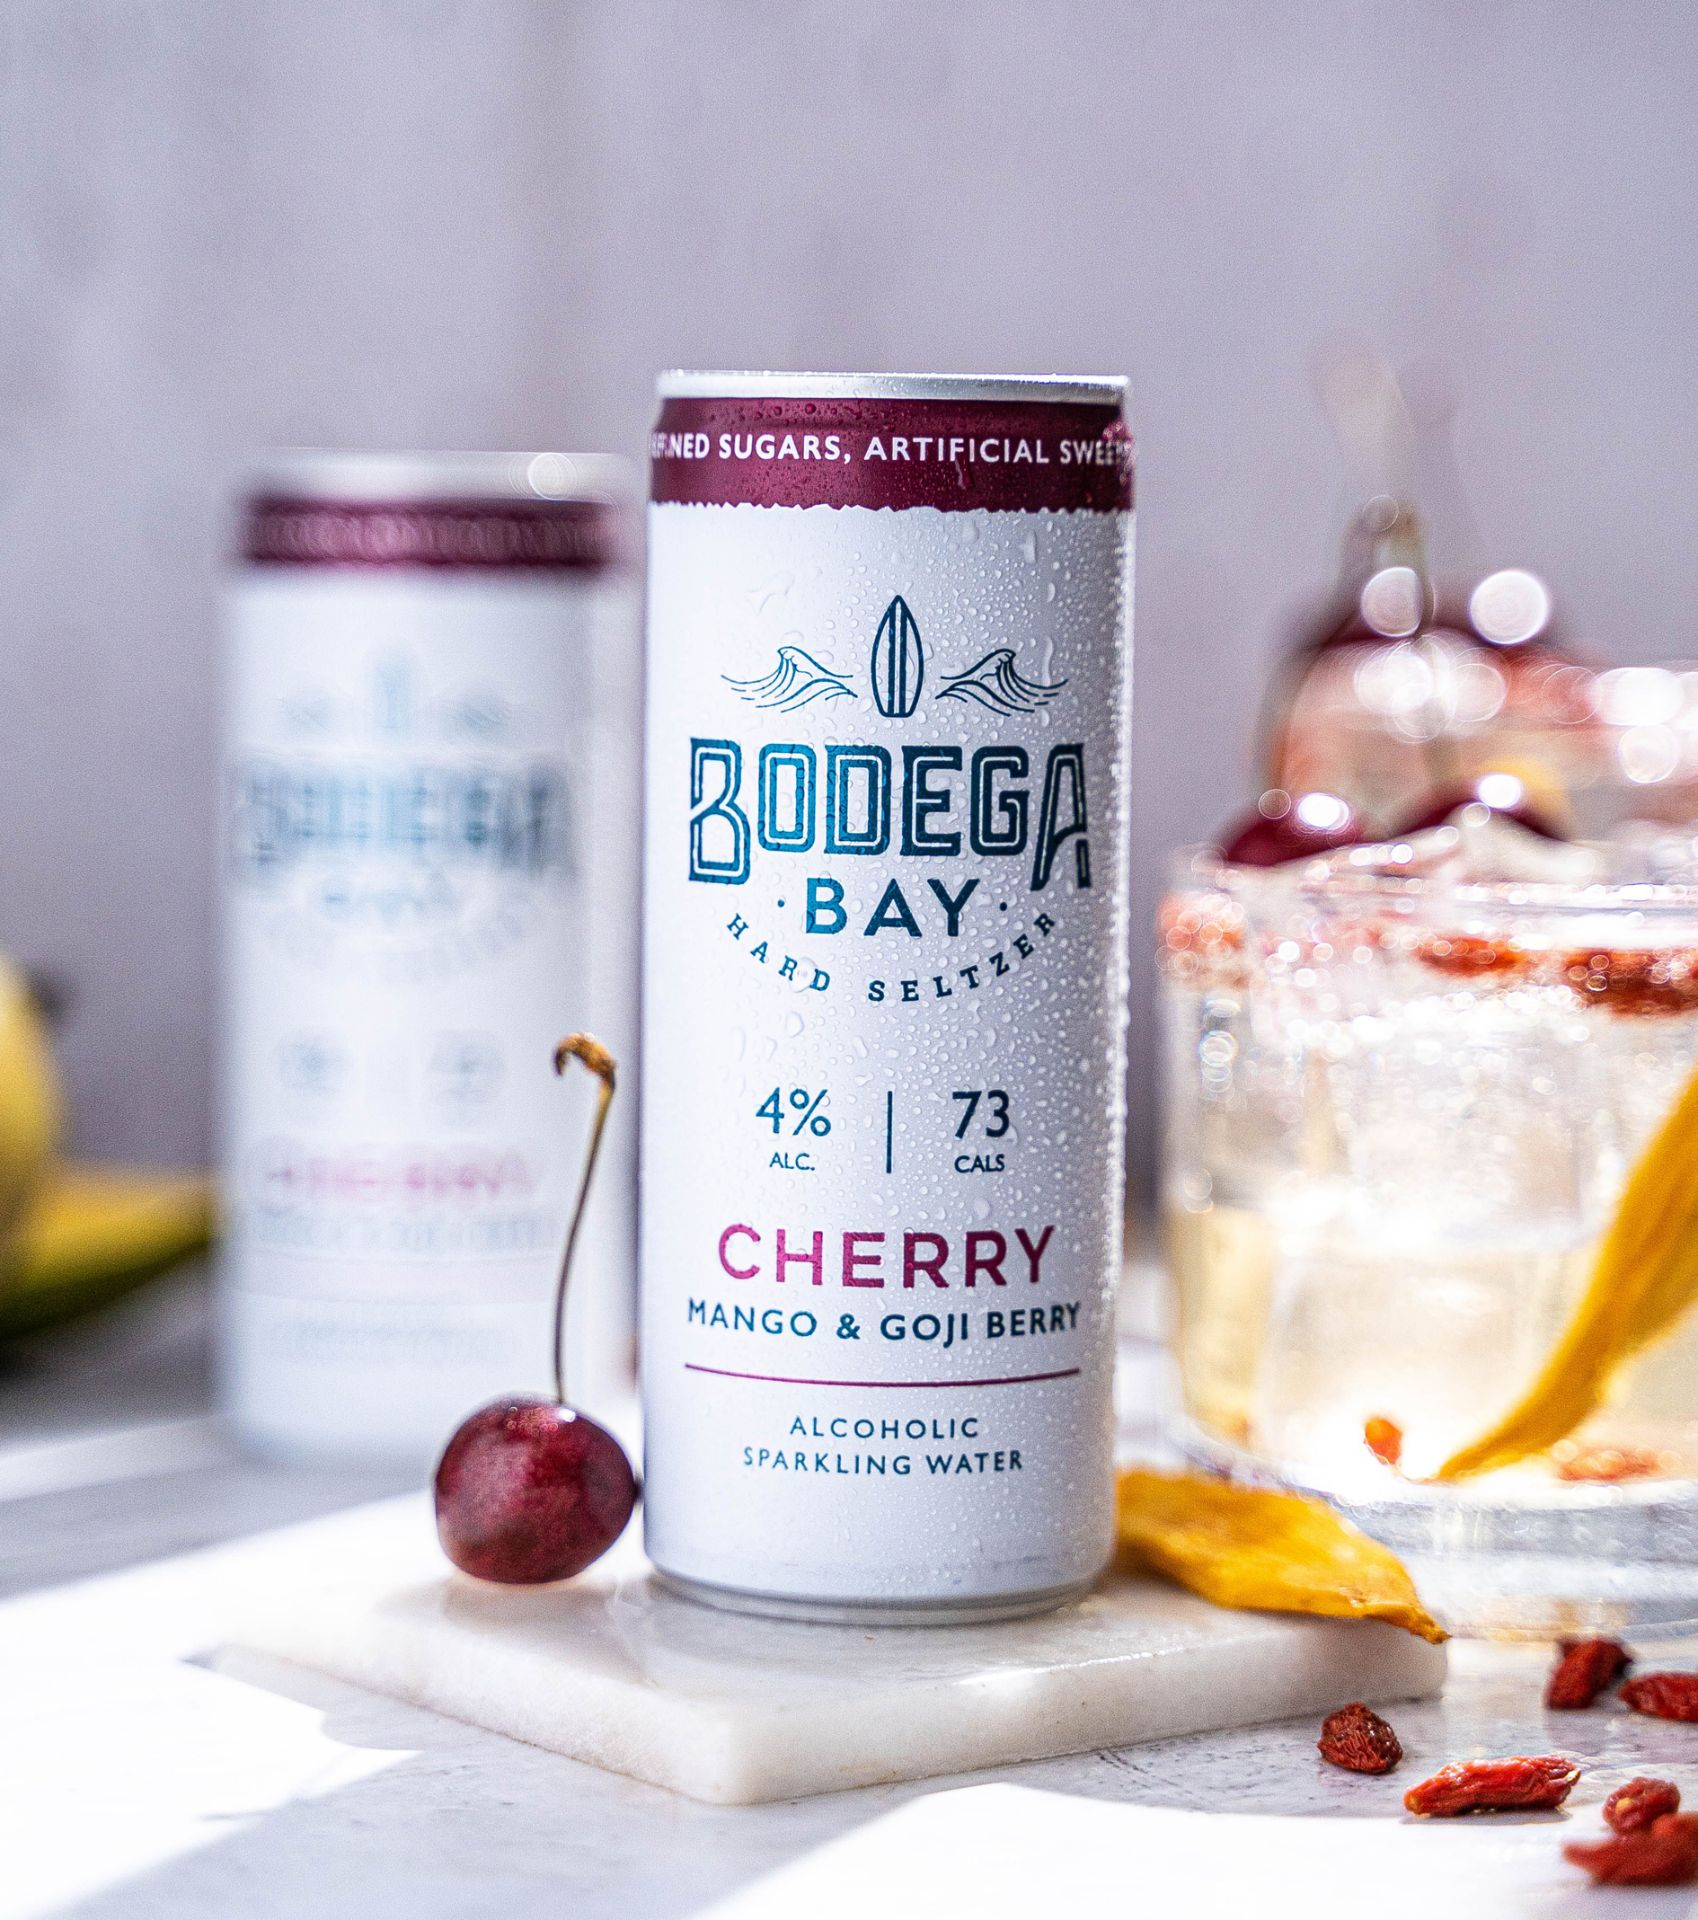 360 x Cans of Bodega Bay Hard Seltzer 250ml Alcoholic Sparkling Water Drinks - Various Flavours - Image 13 of 20